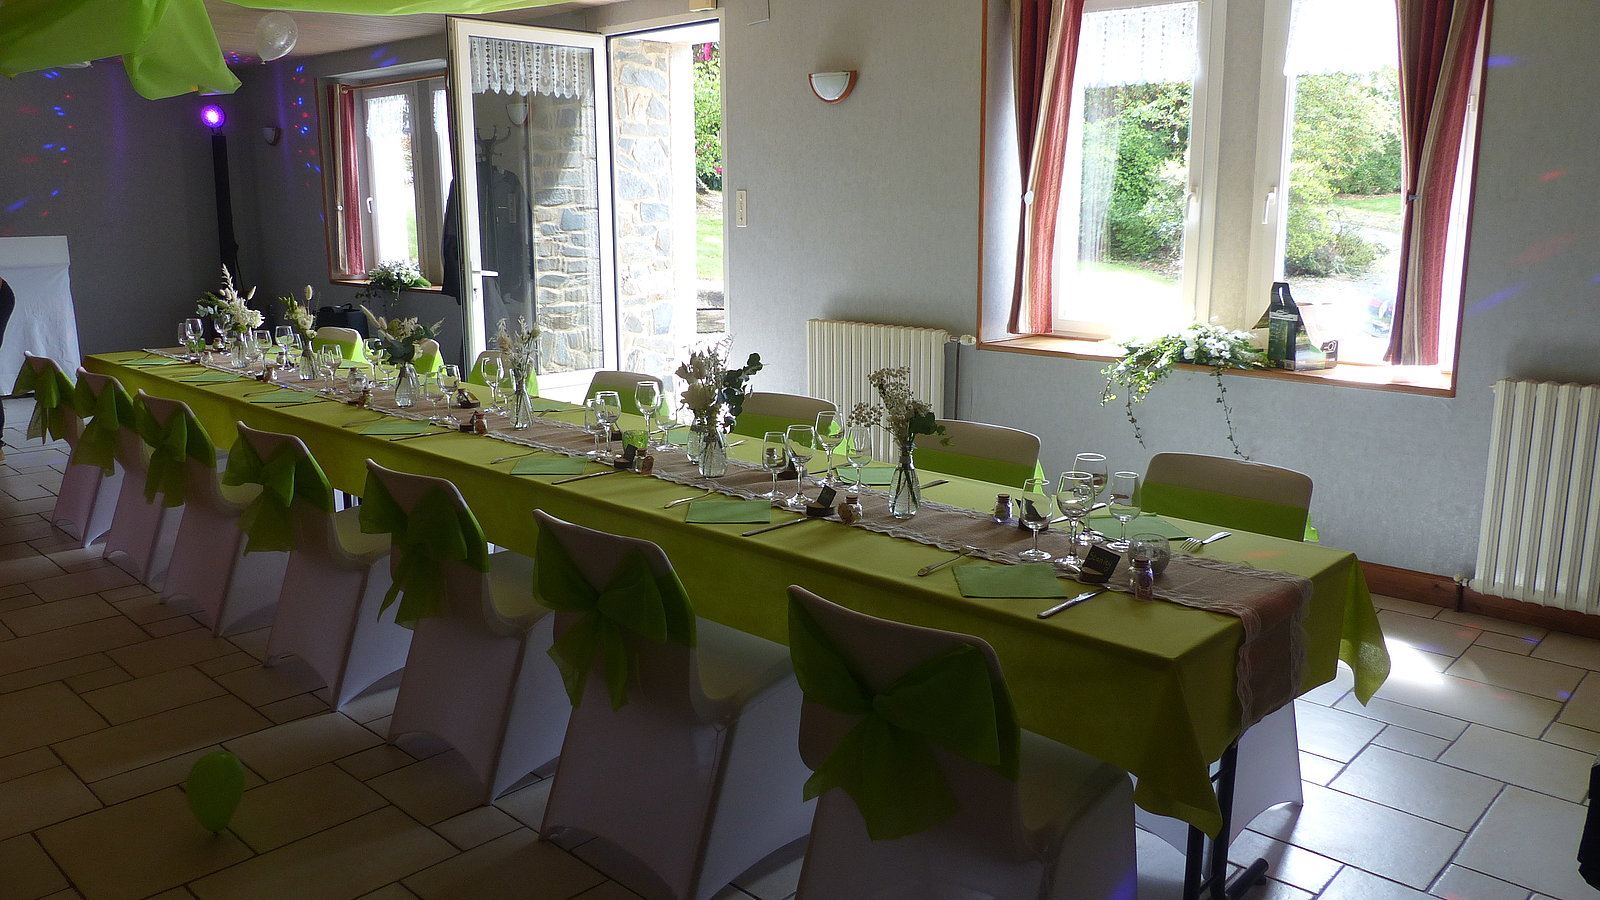 Family and friendly receptions for 45 guests